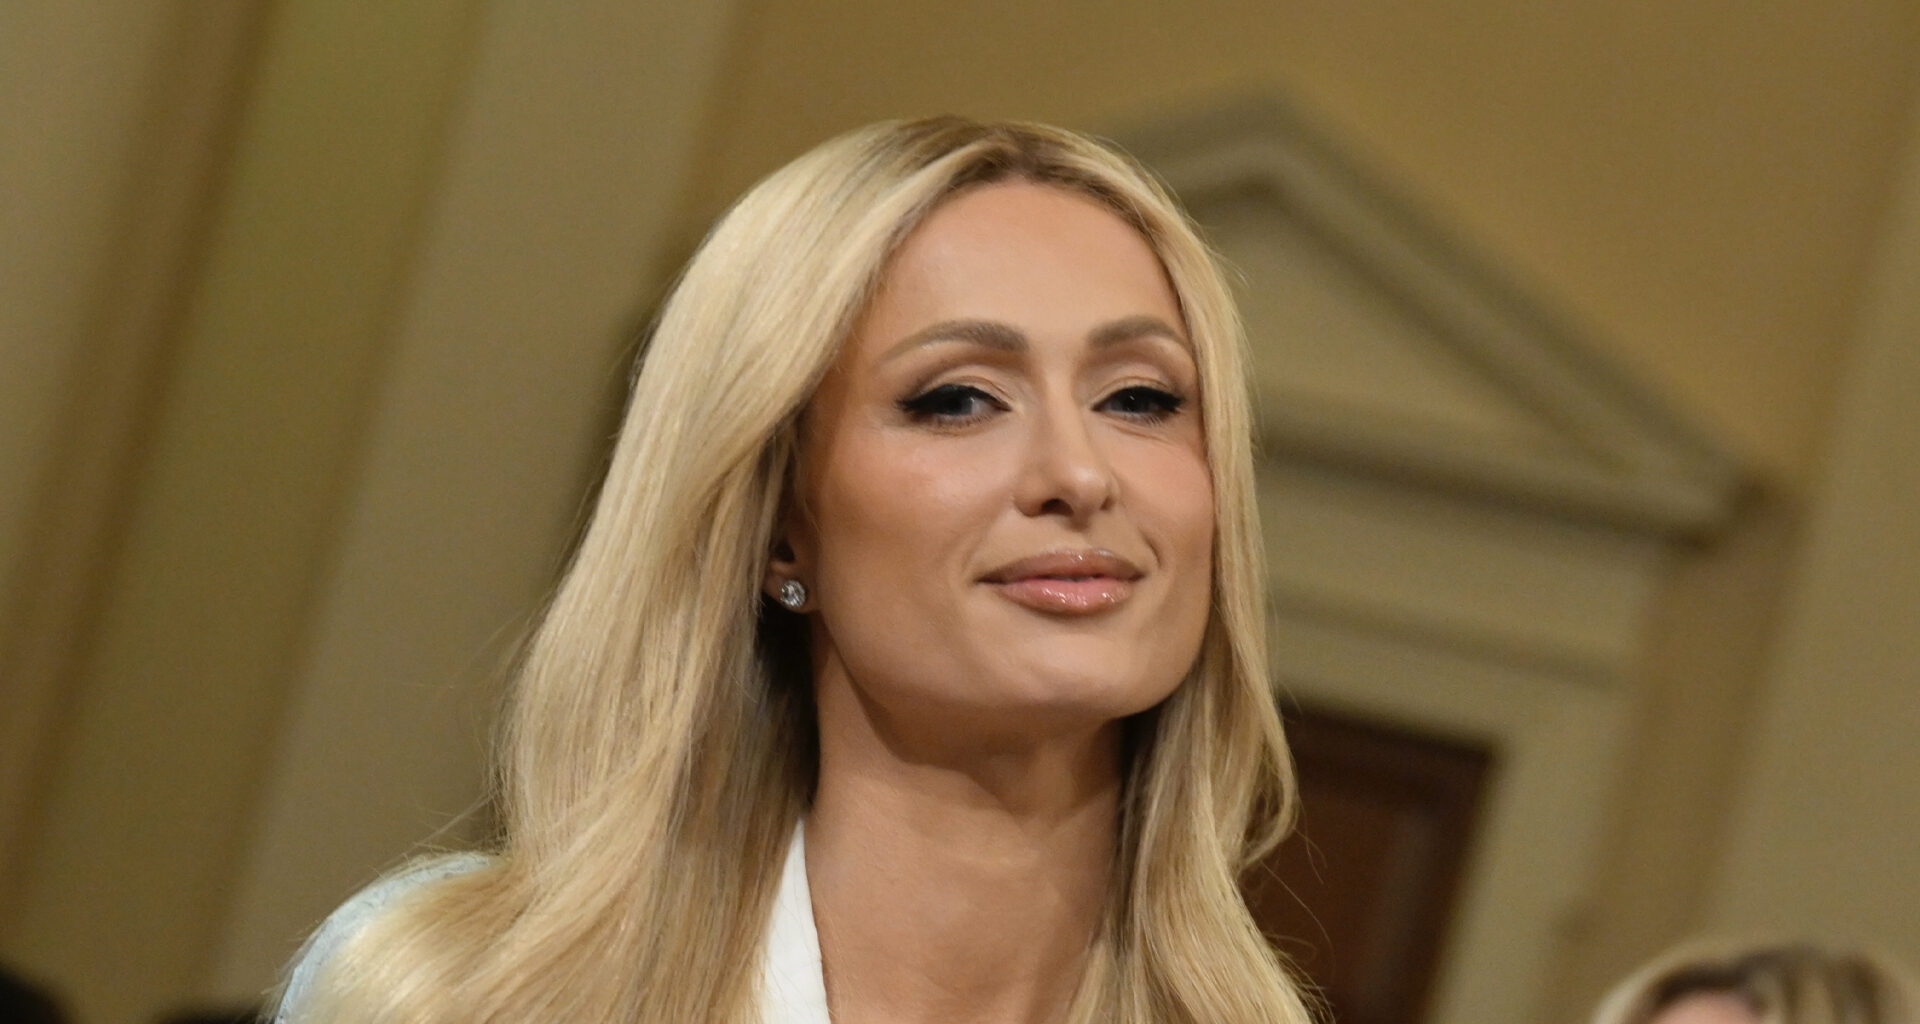 Paris Hilton shocks fans with ‘insane’ voice change as she switches from ‘fake’ baby talk to deep tone before congress